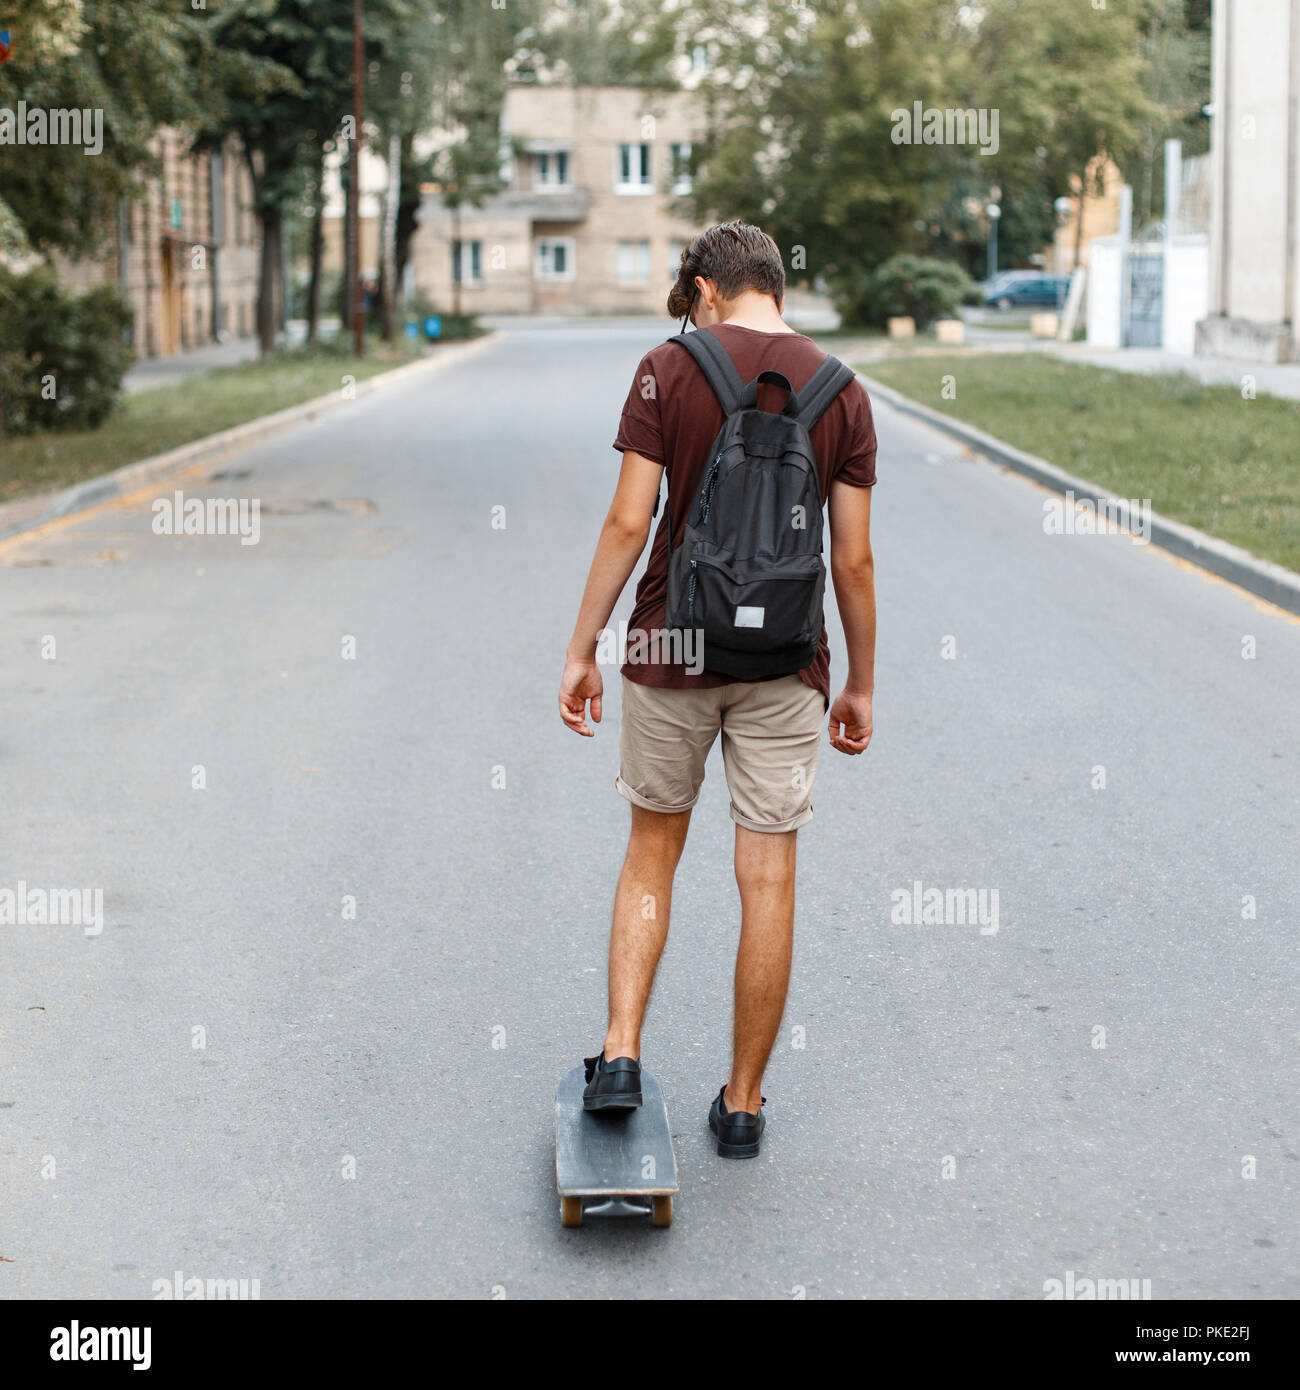 Young handsome guy with a backpack riding a skateboard on the road Stock Photo